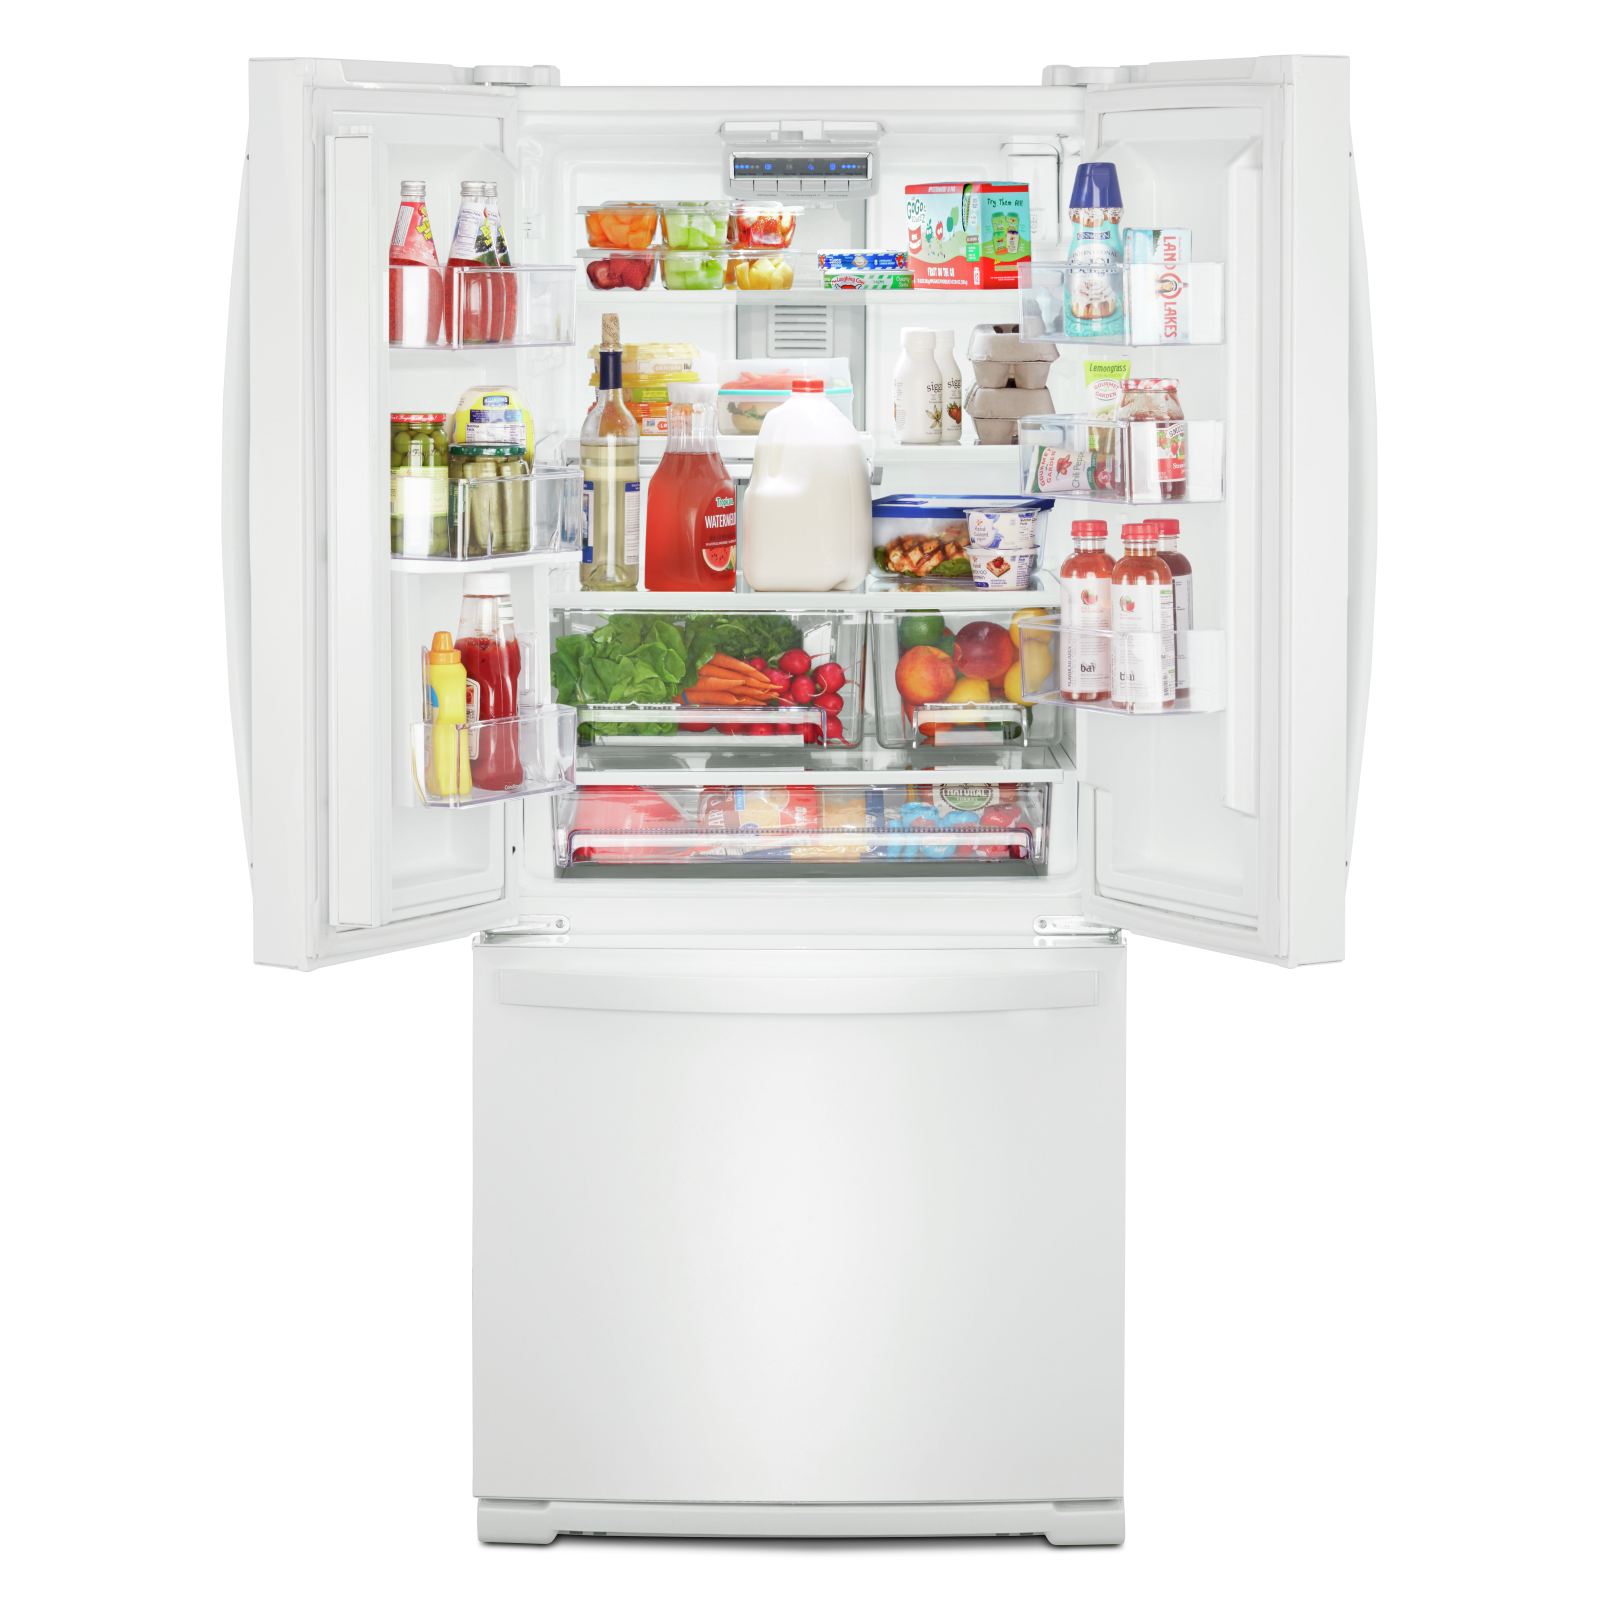 Whirlpool - 29.5 Inch 19.7 cu. ft French Door Refrigerator in White - WRF560SFHW